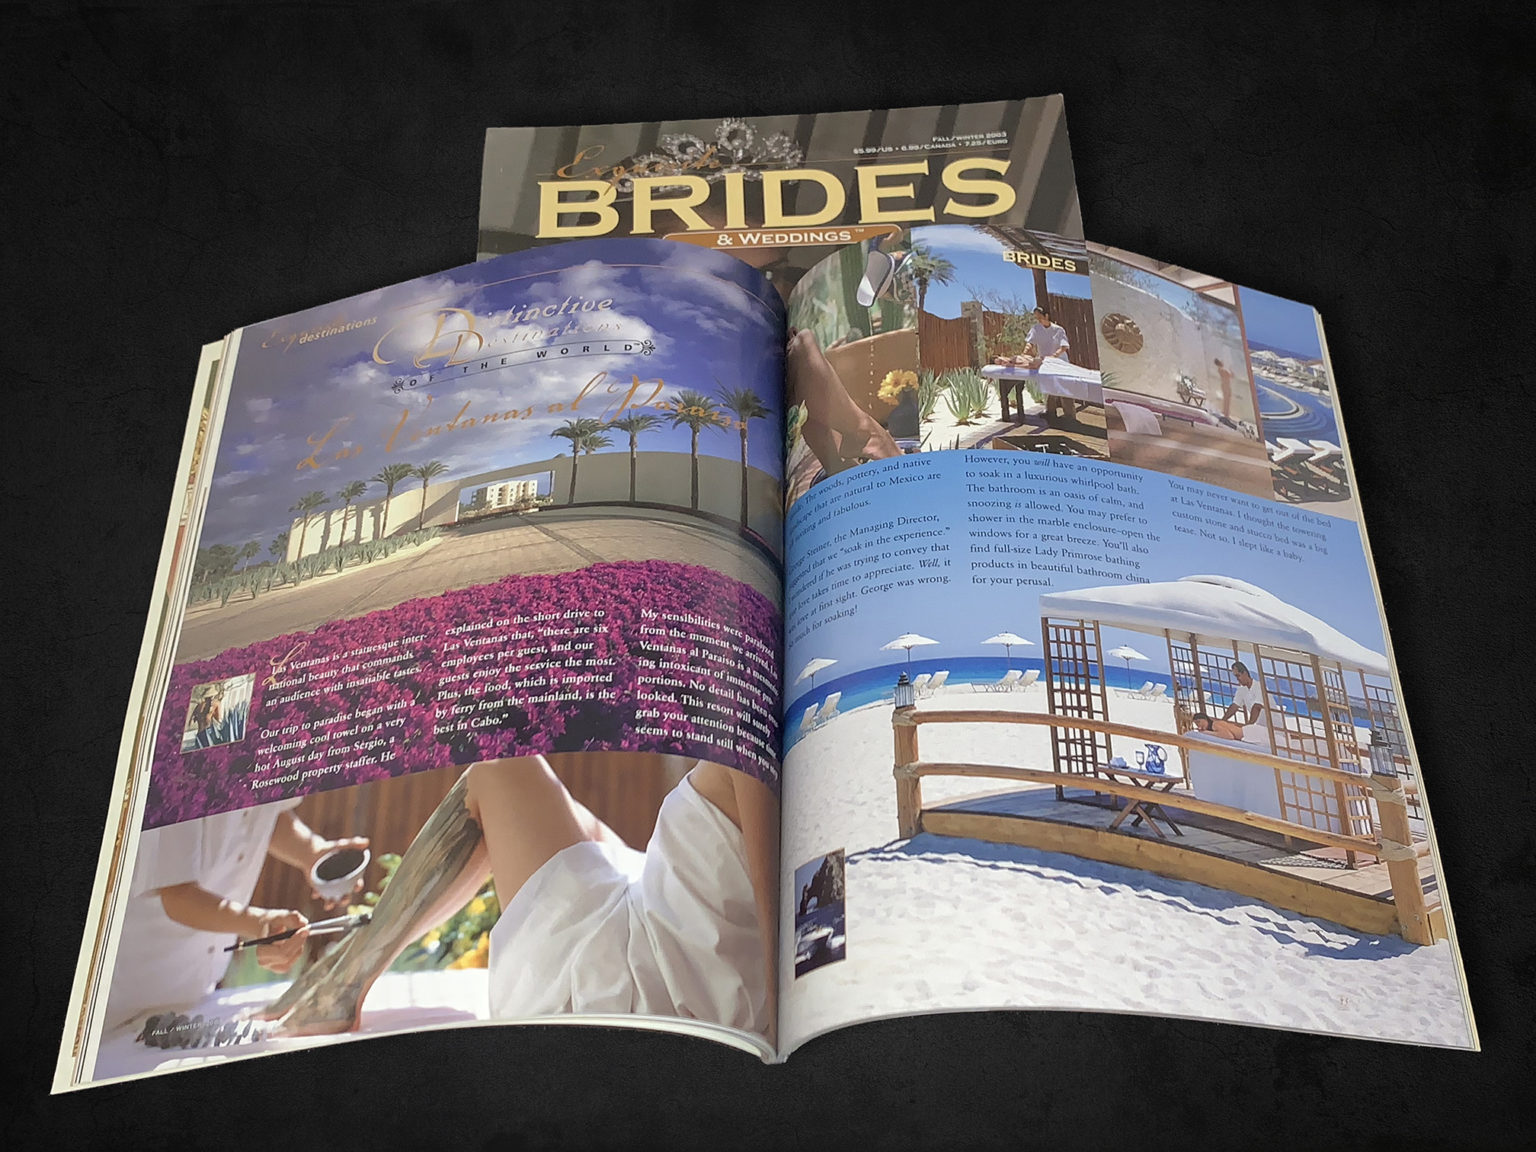 Exquisite Brides & Weddings Magazine Spread Layout • Designed by: Designs In Motion, Inc.